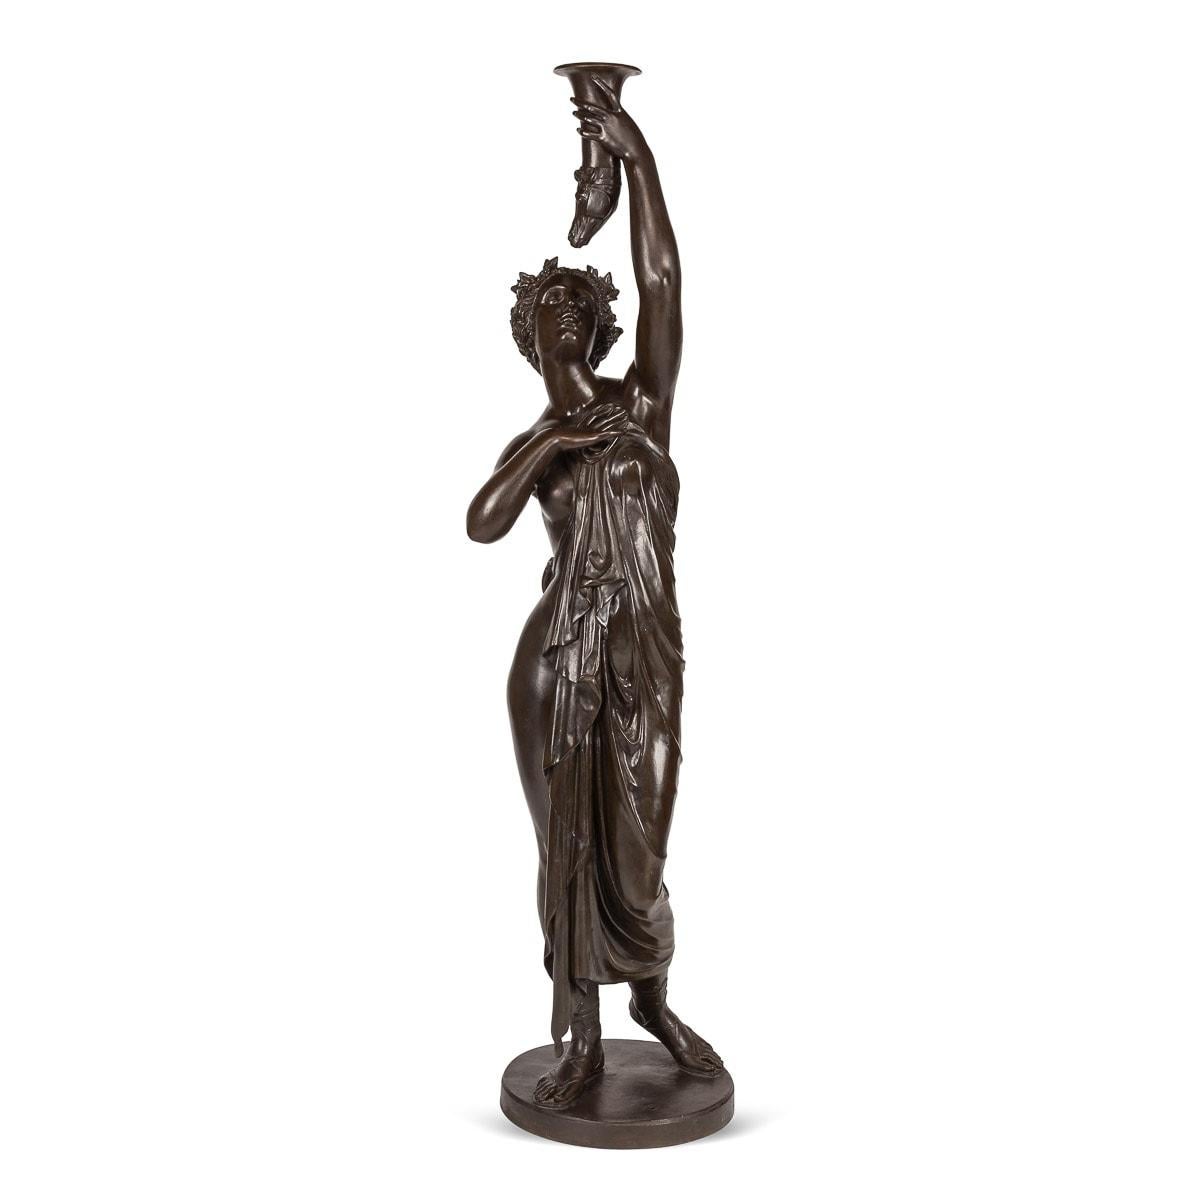 Antique 19th Century French pair of life-sized bronze, depicting partially nude maidens elevating a torch. These statues, boasting a commanding stature and large presence, are elegantly draped in robes. Atop each figure rests a crown of verdant